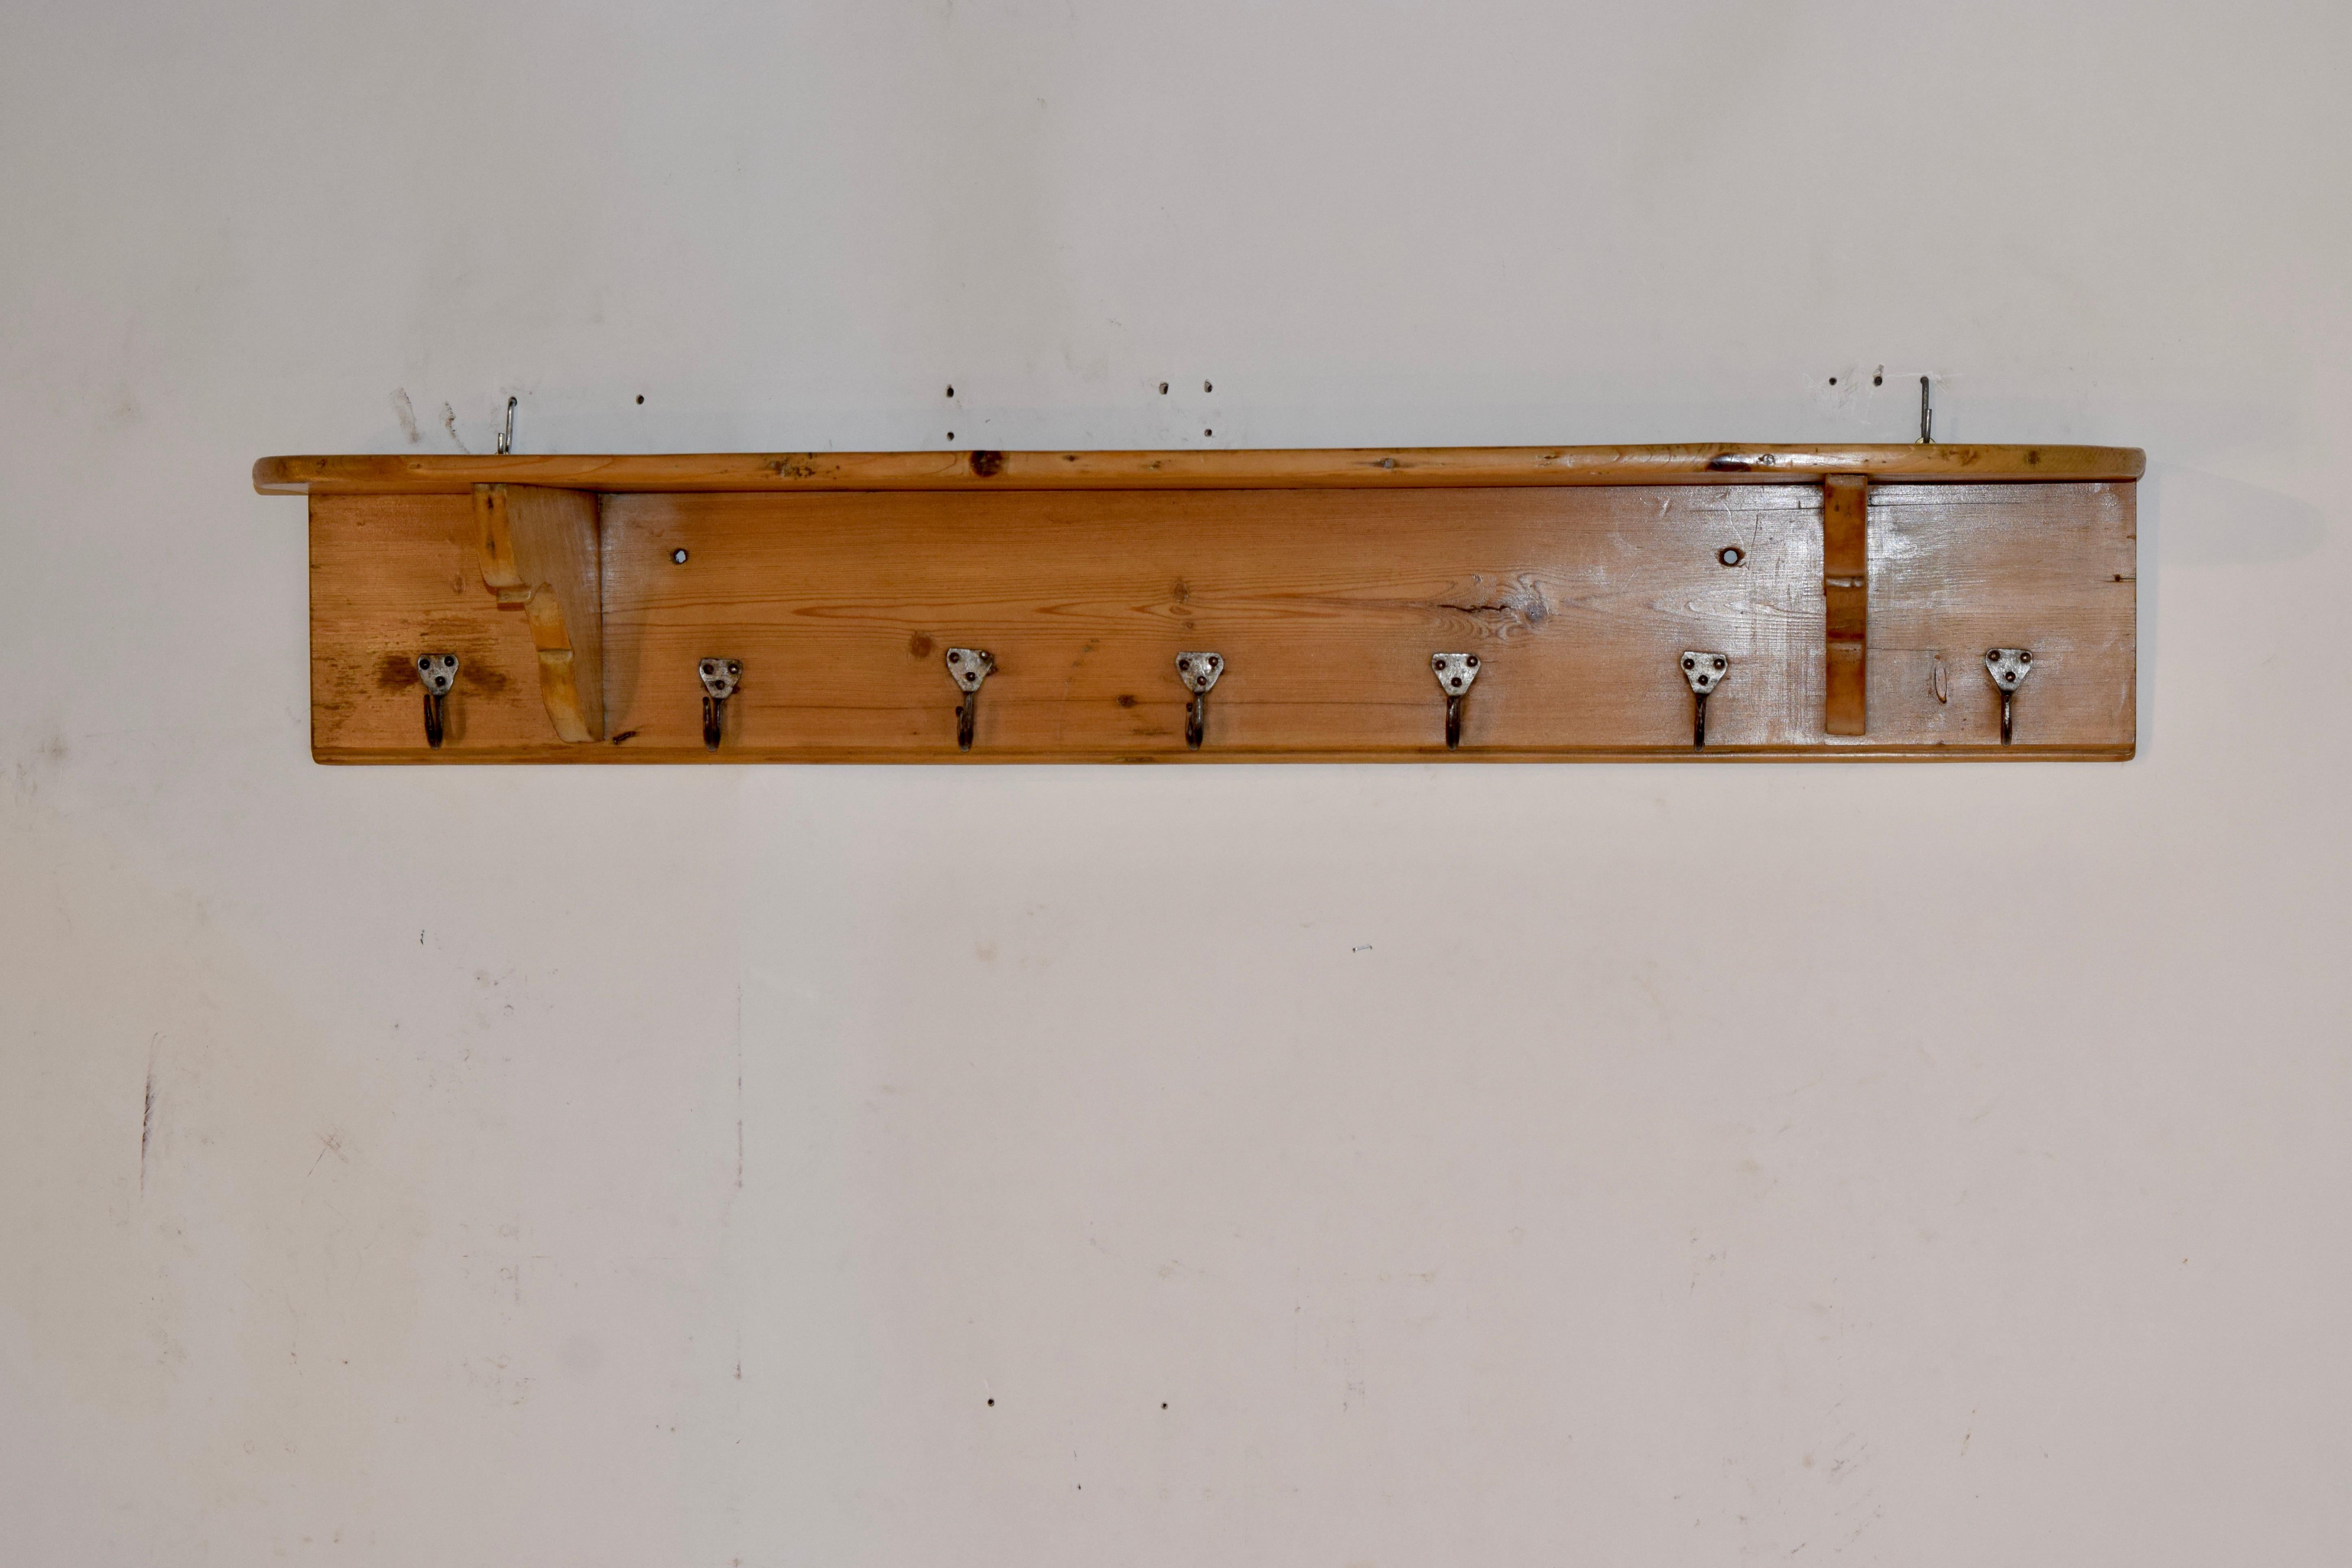 19th century pine wall shelf from England with serpentine support brackets and seven simple hat or coat hooks.